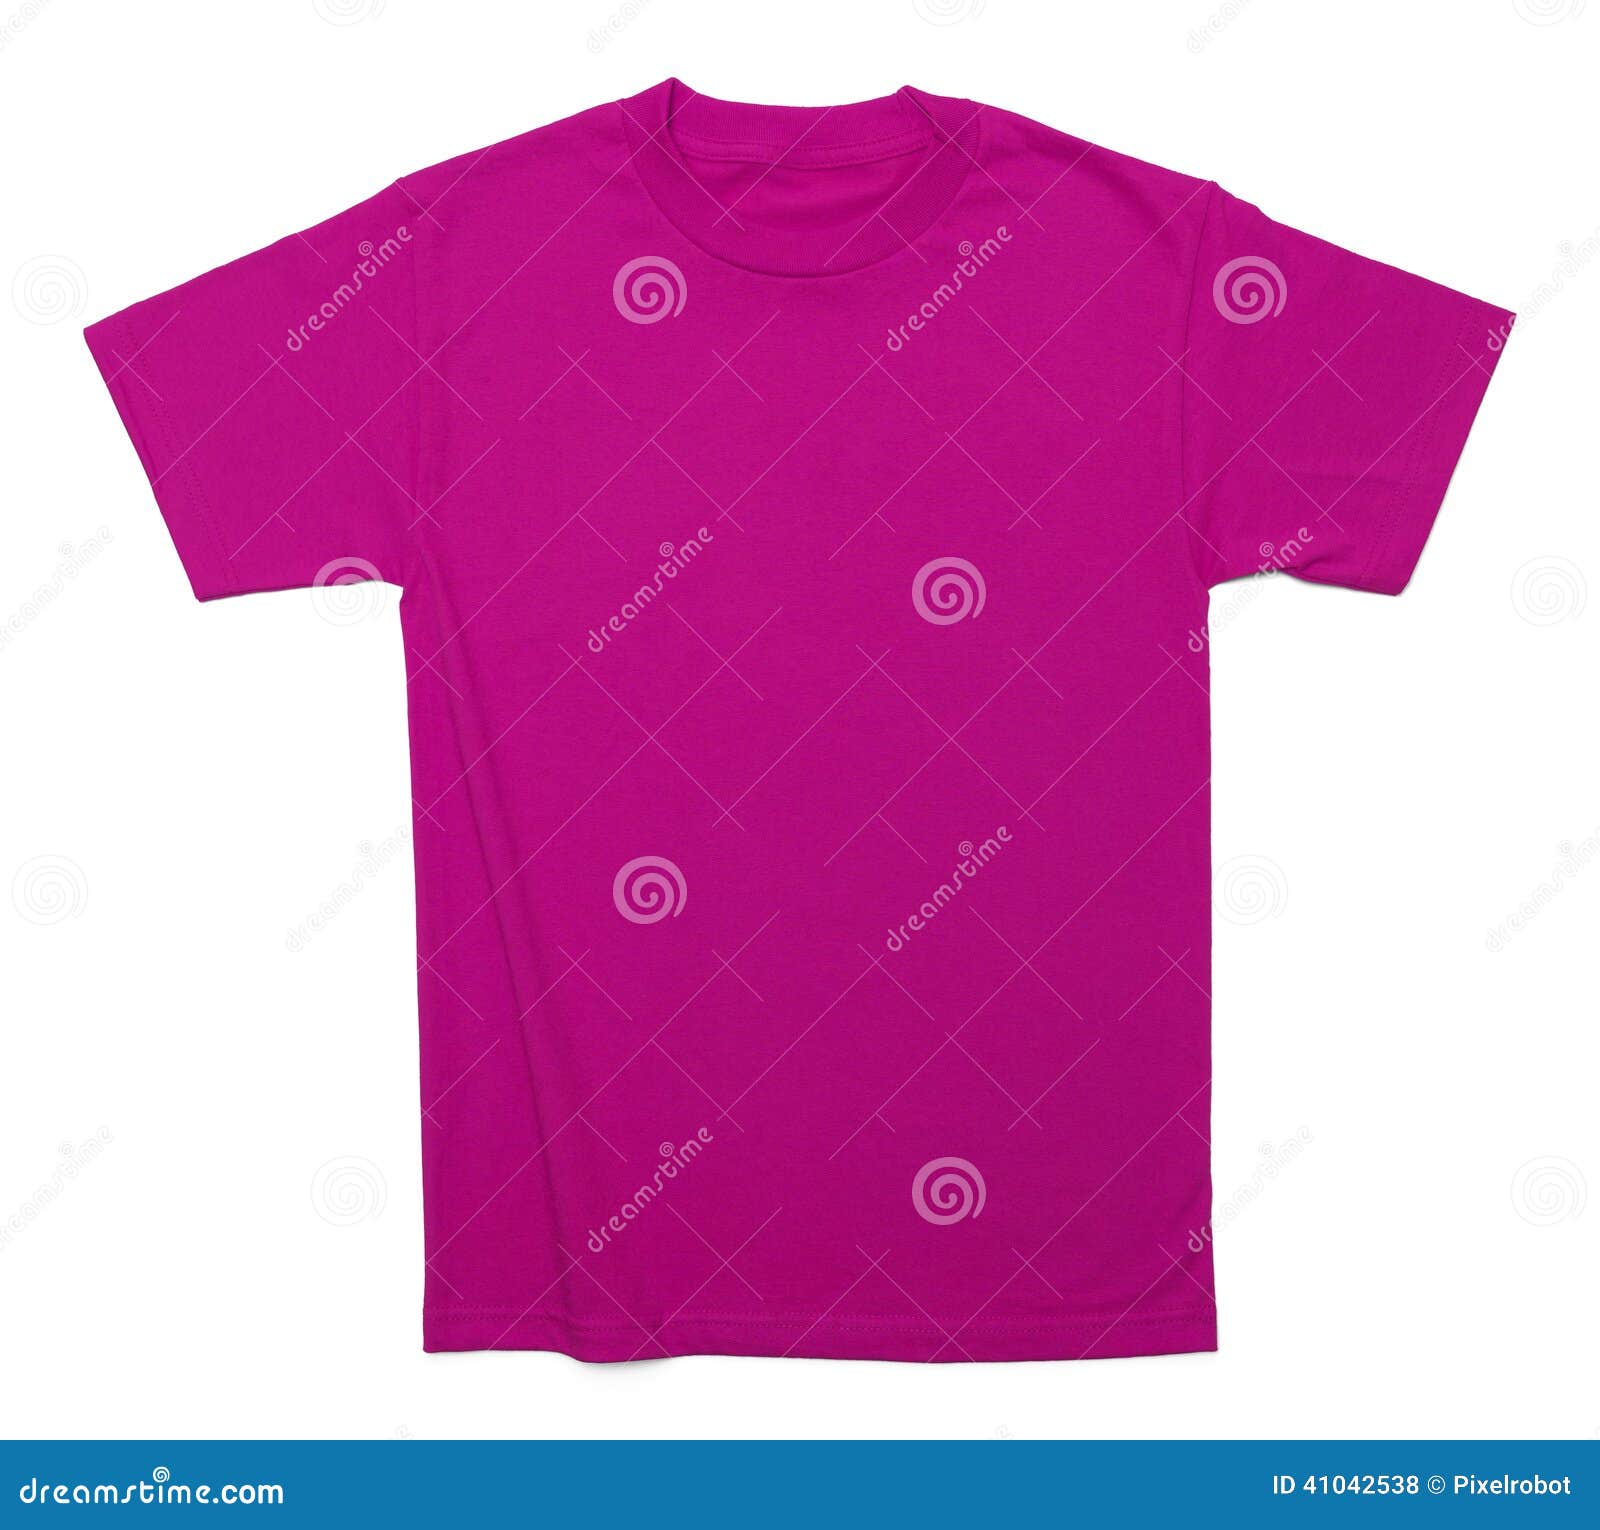 Pink Tshirt stock photo. Image of blank, health, clean - 41042538